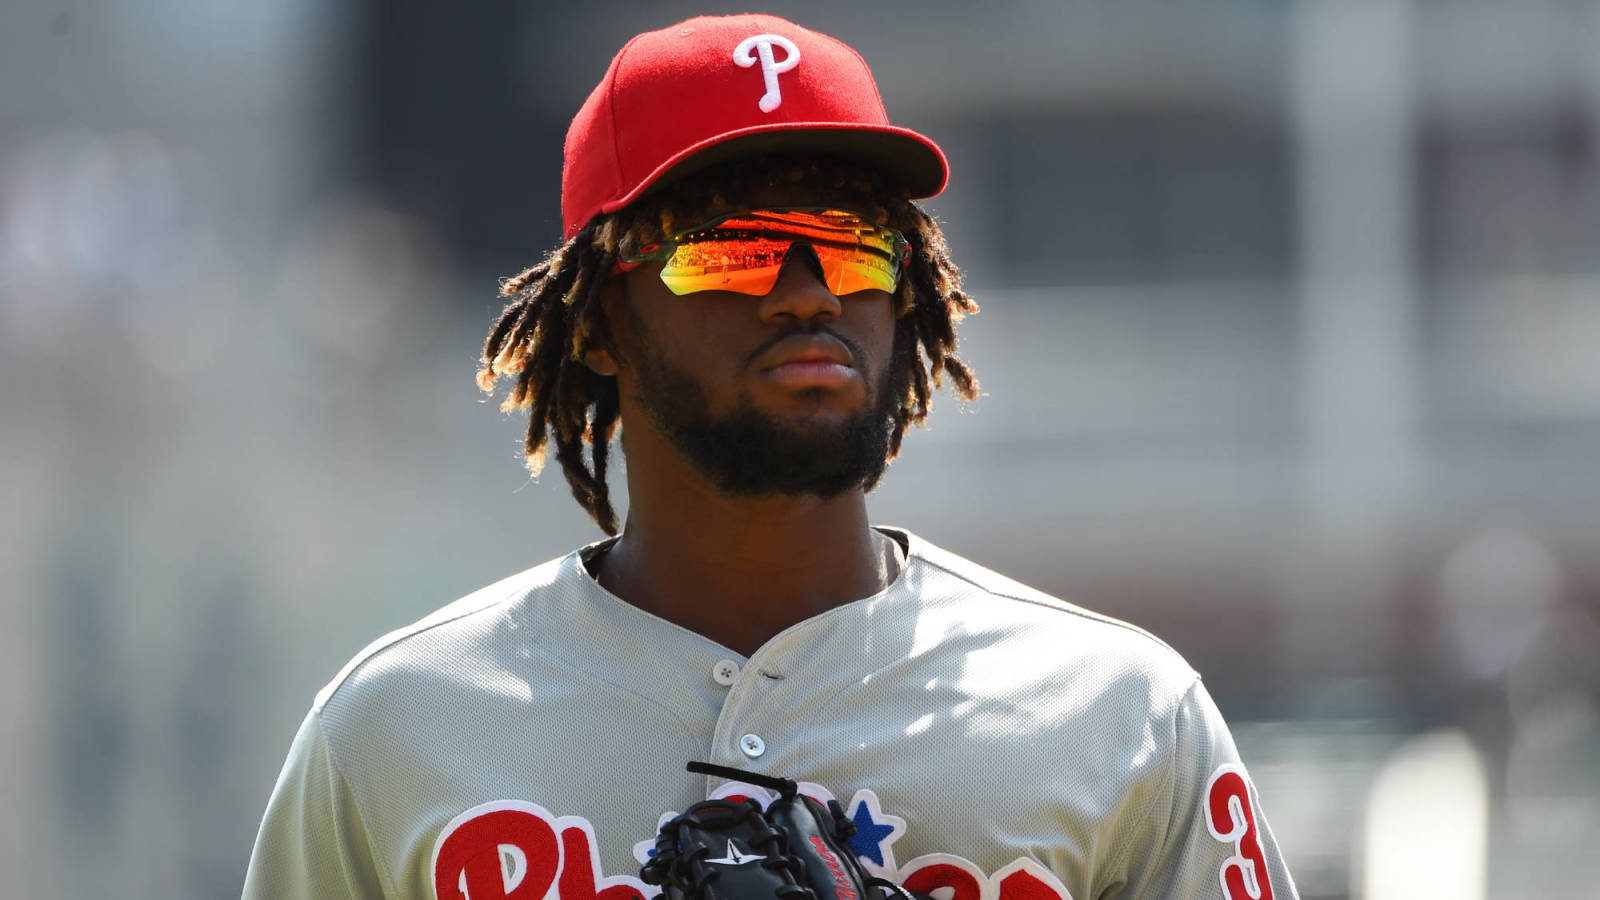 Will Odubel Herrera be able to play in the majors